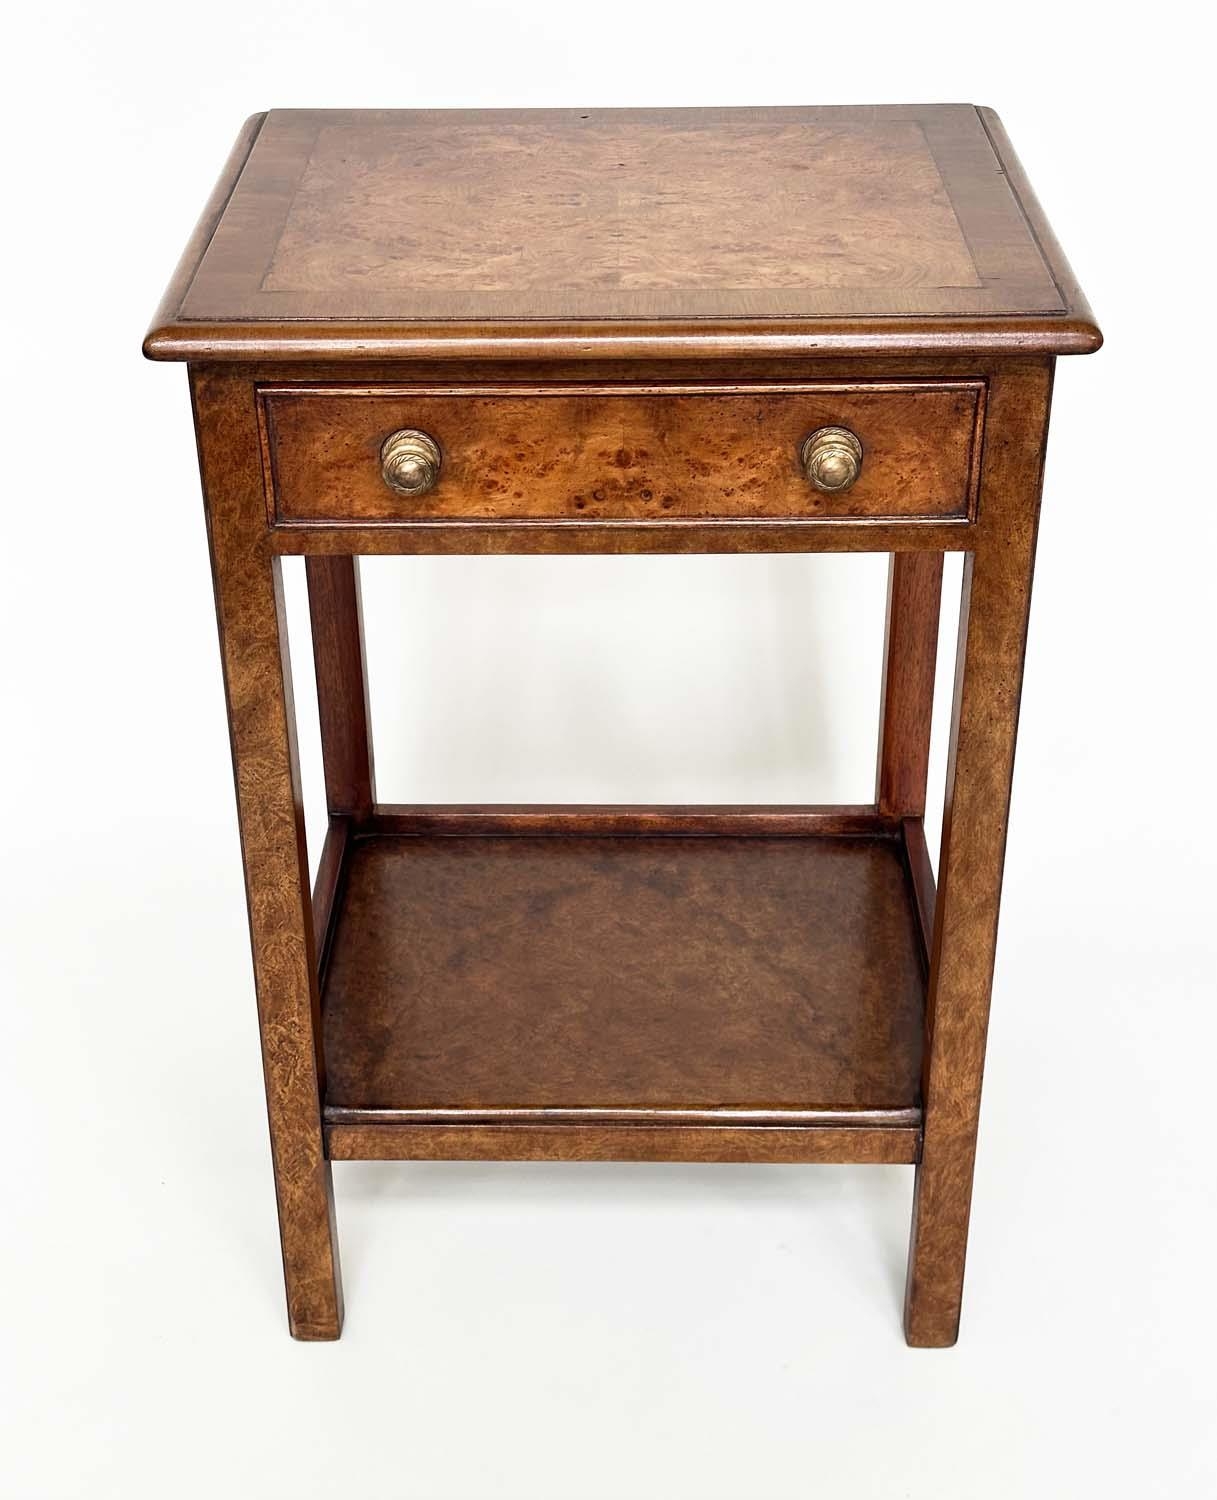 LAMP TABLES, a pair, George III design burr walnut and crossbanded each with drawer and undertier, - Image 6 of 9